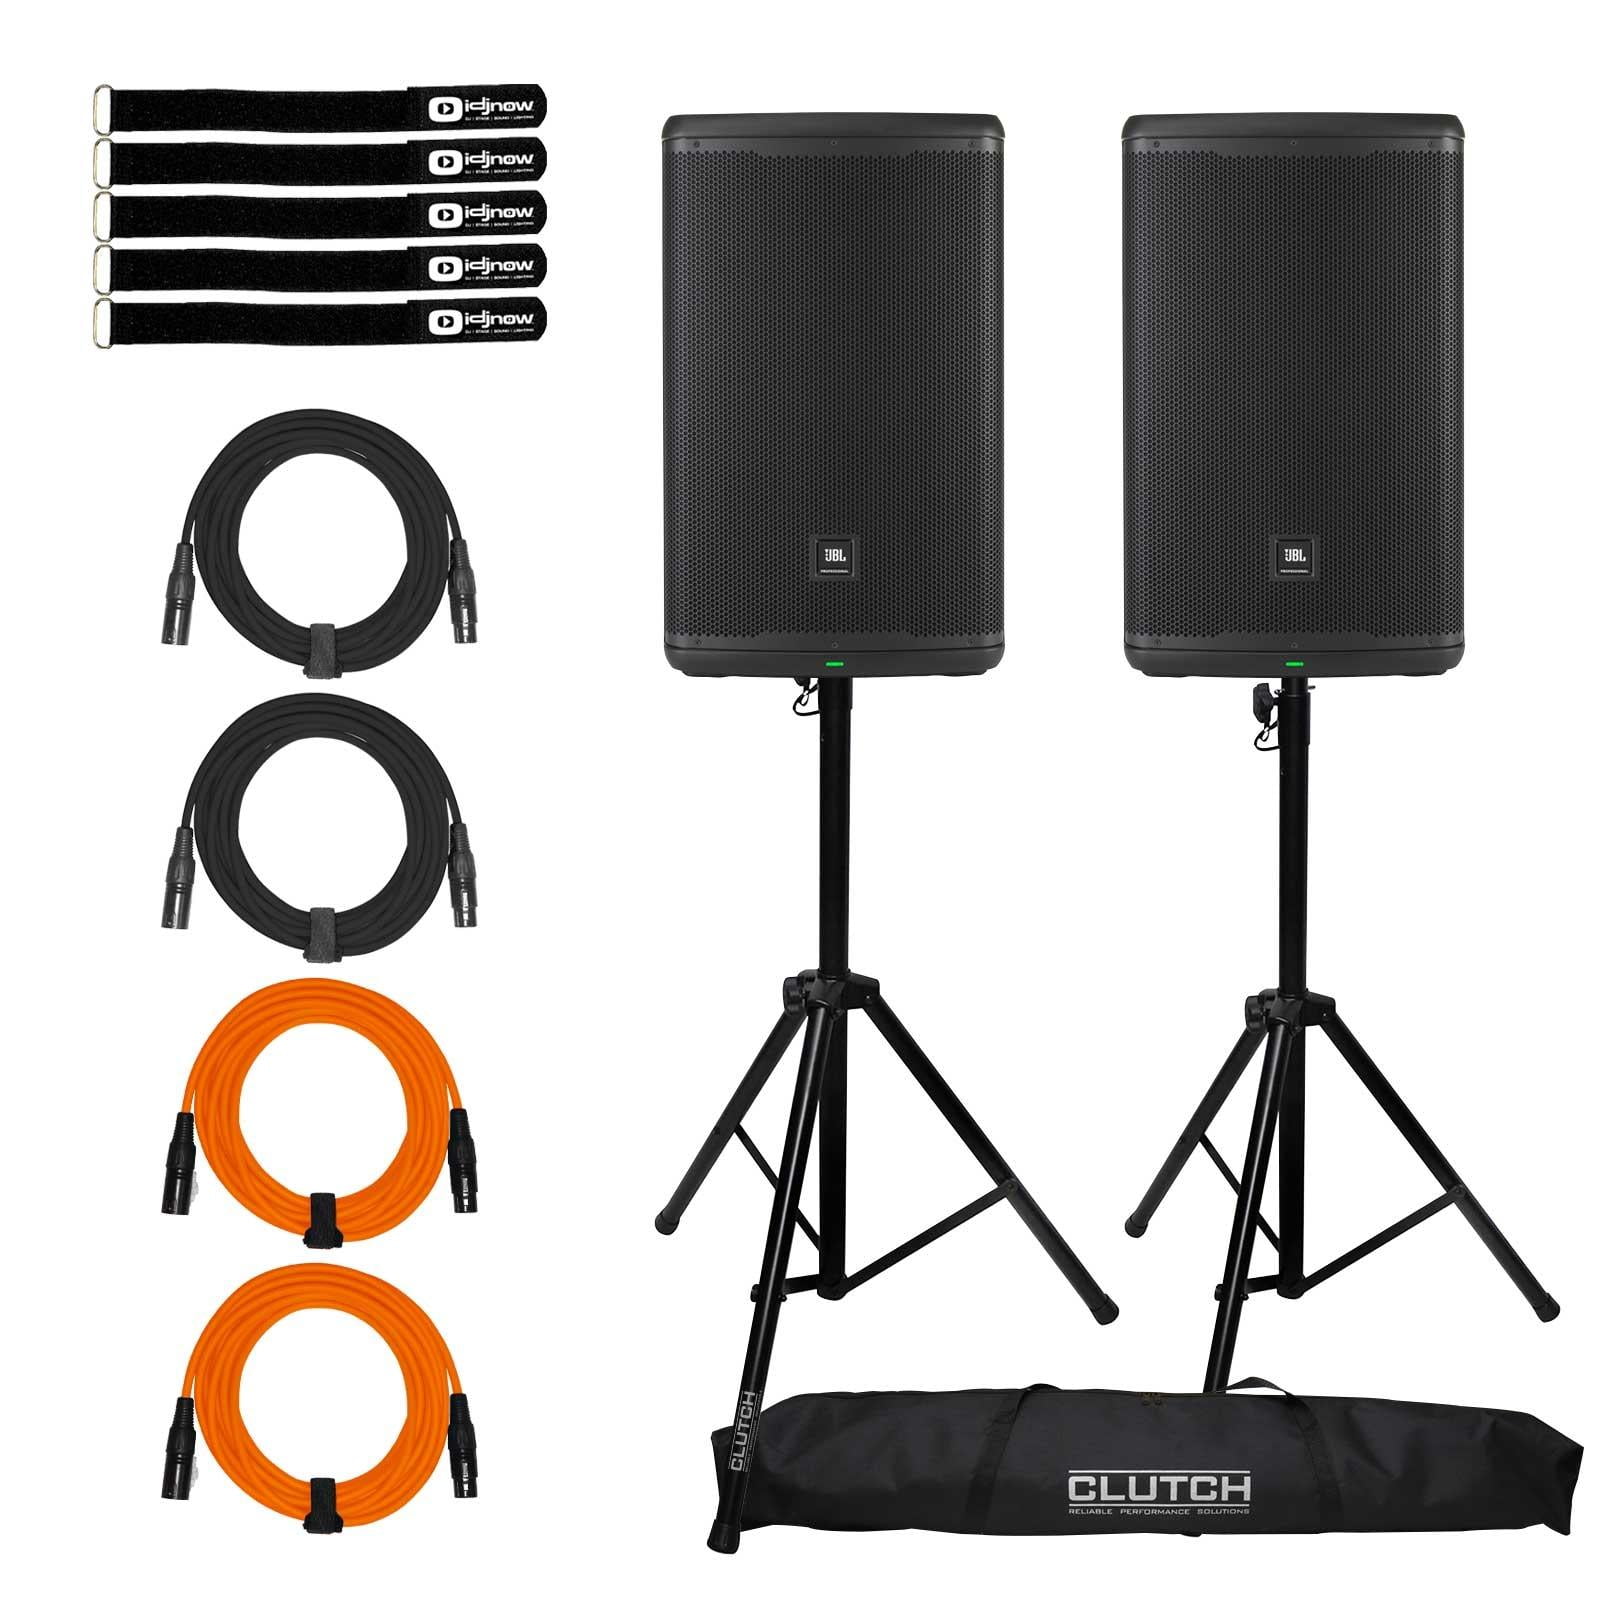 graven Uitbarsten ambulance 2) JBL Professional EON715 15" EON 700 Series Powered PA Bluetooth Speakers  with Tripod Speaker Stands Package - Walmart.com